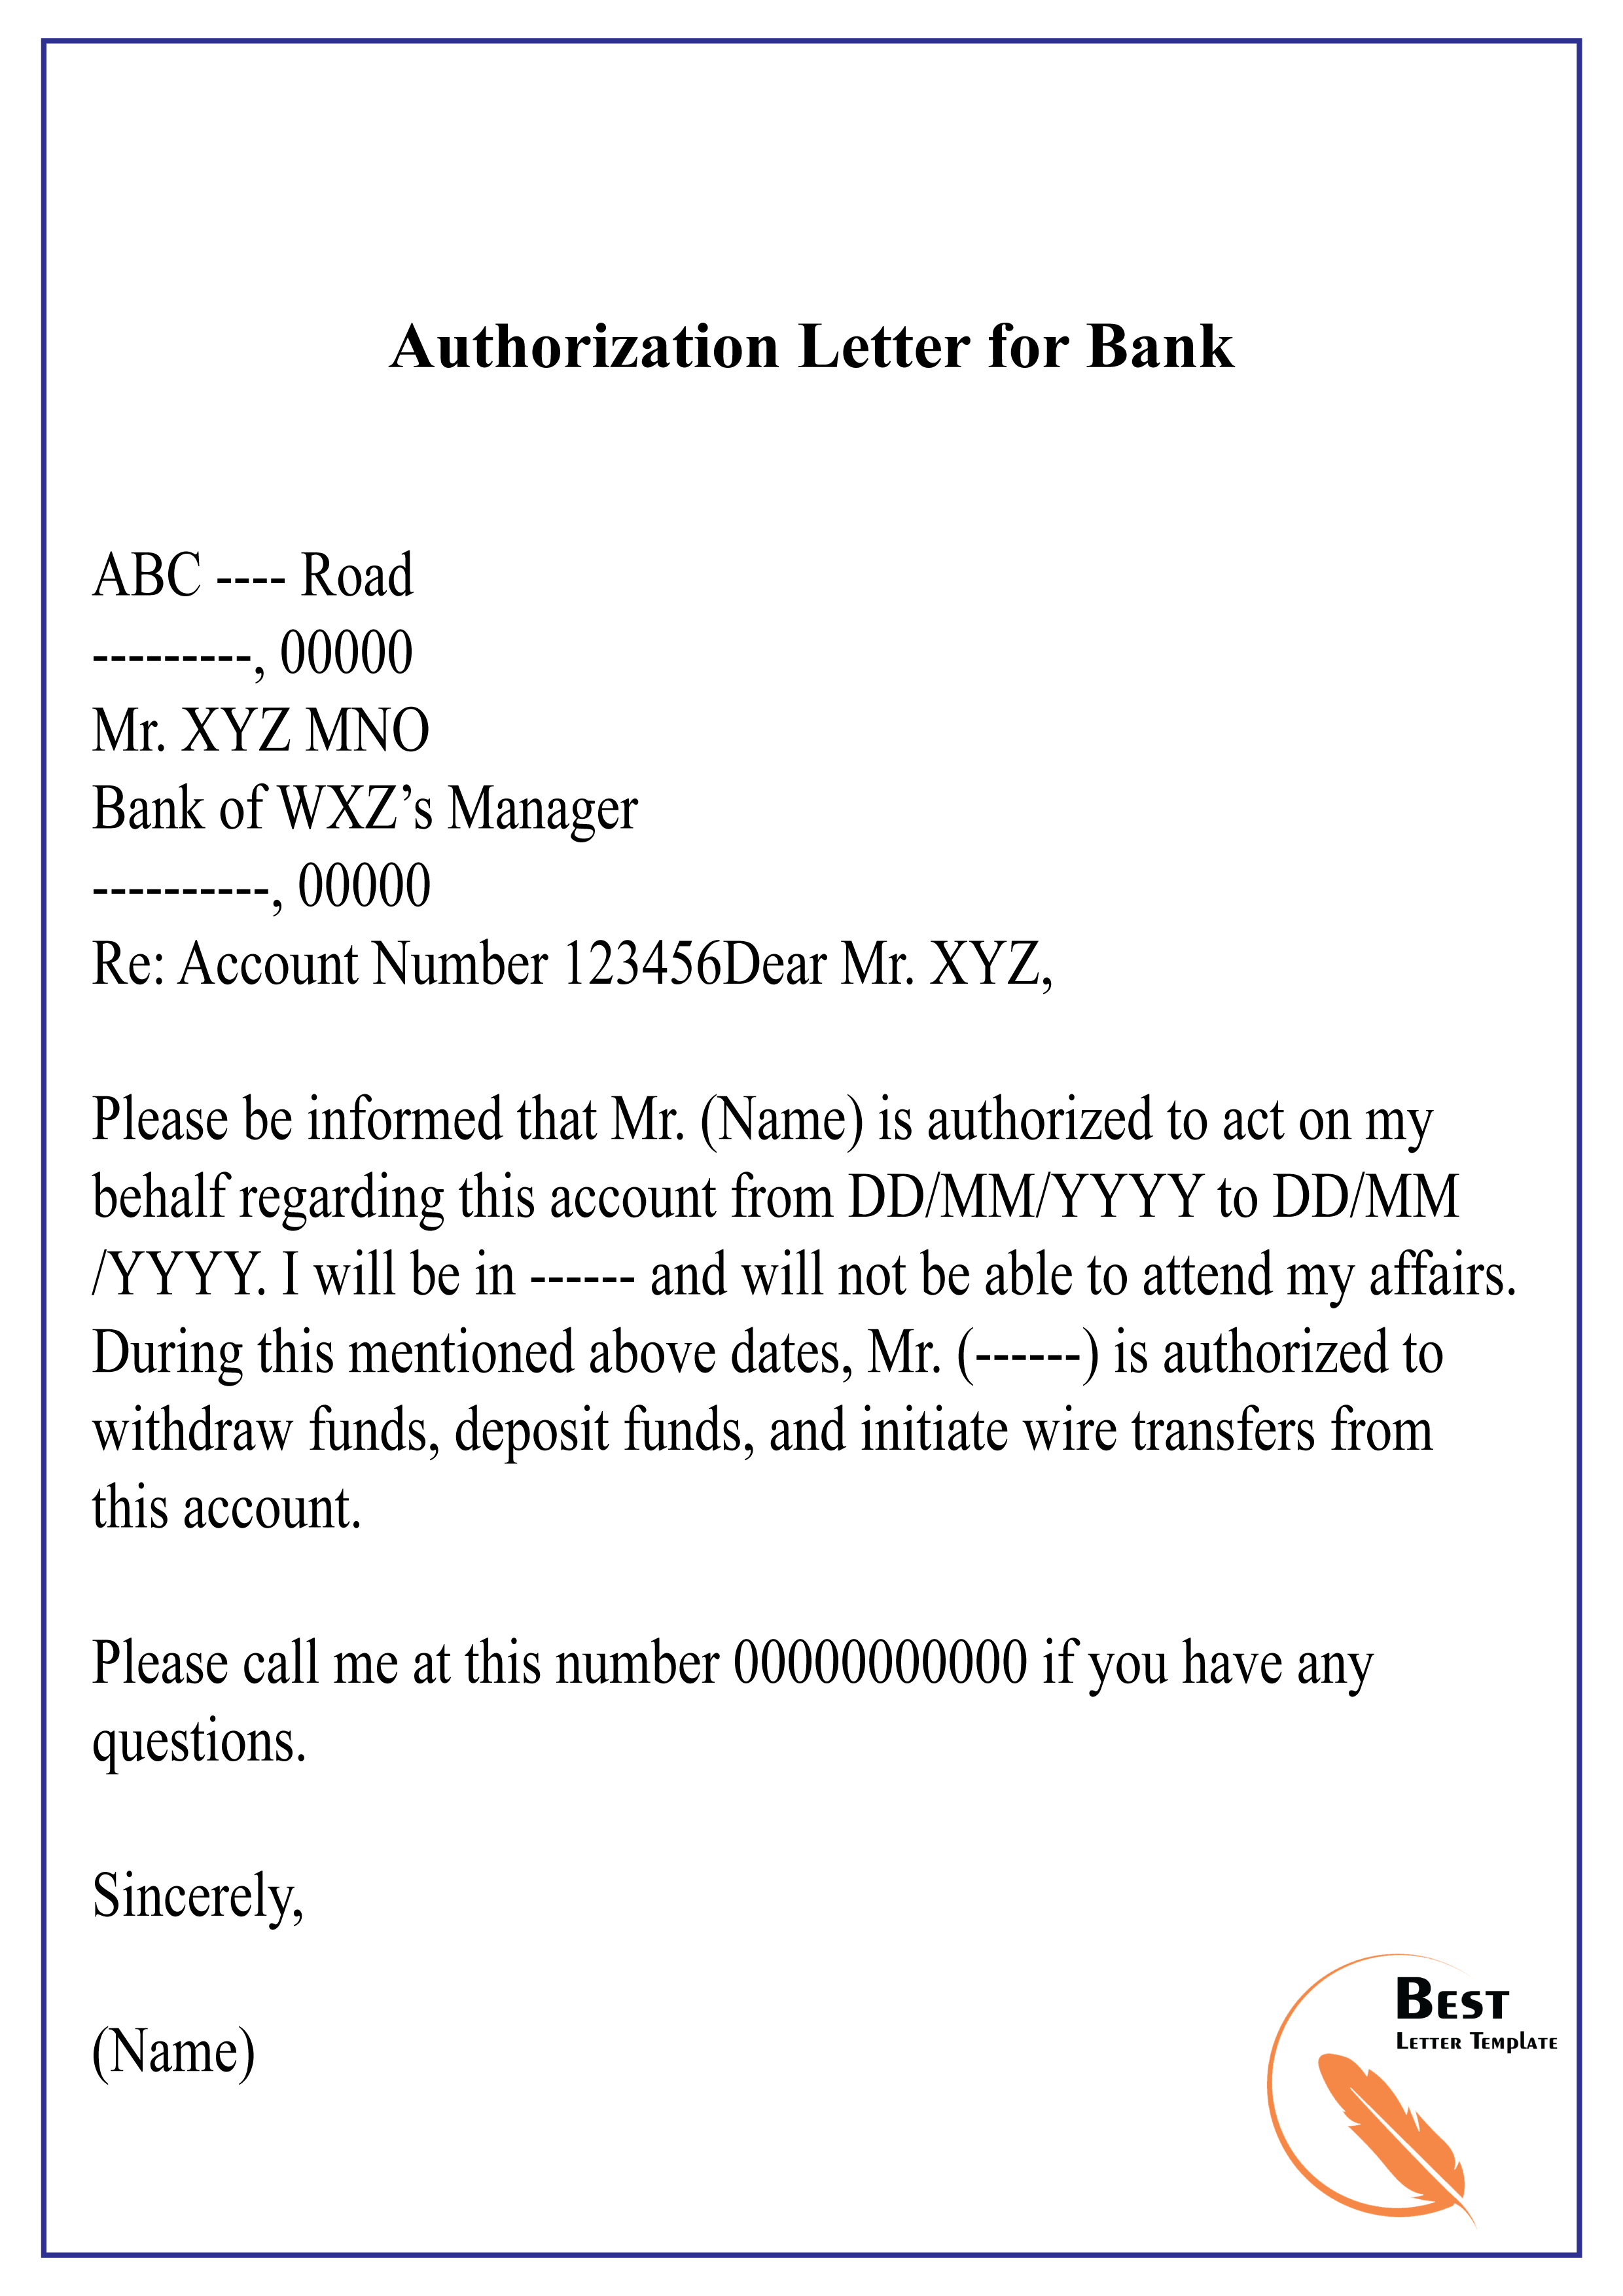 Authorization Letter for Bank-01 - Best Letter Template